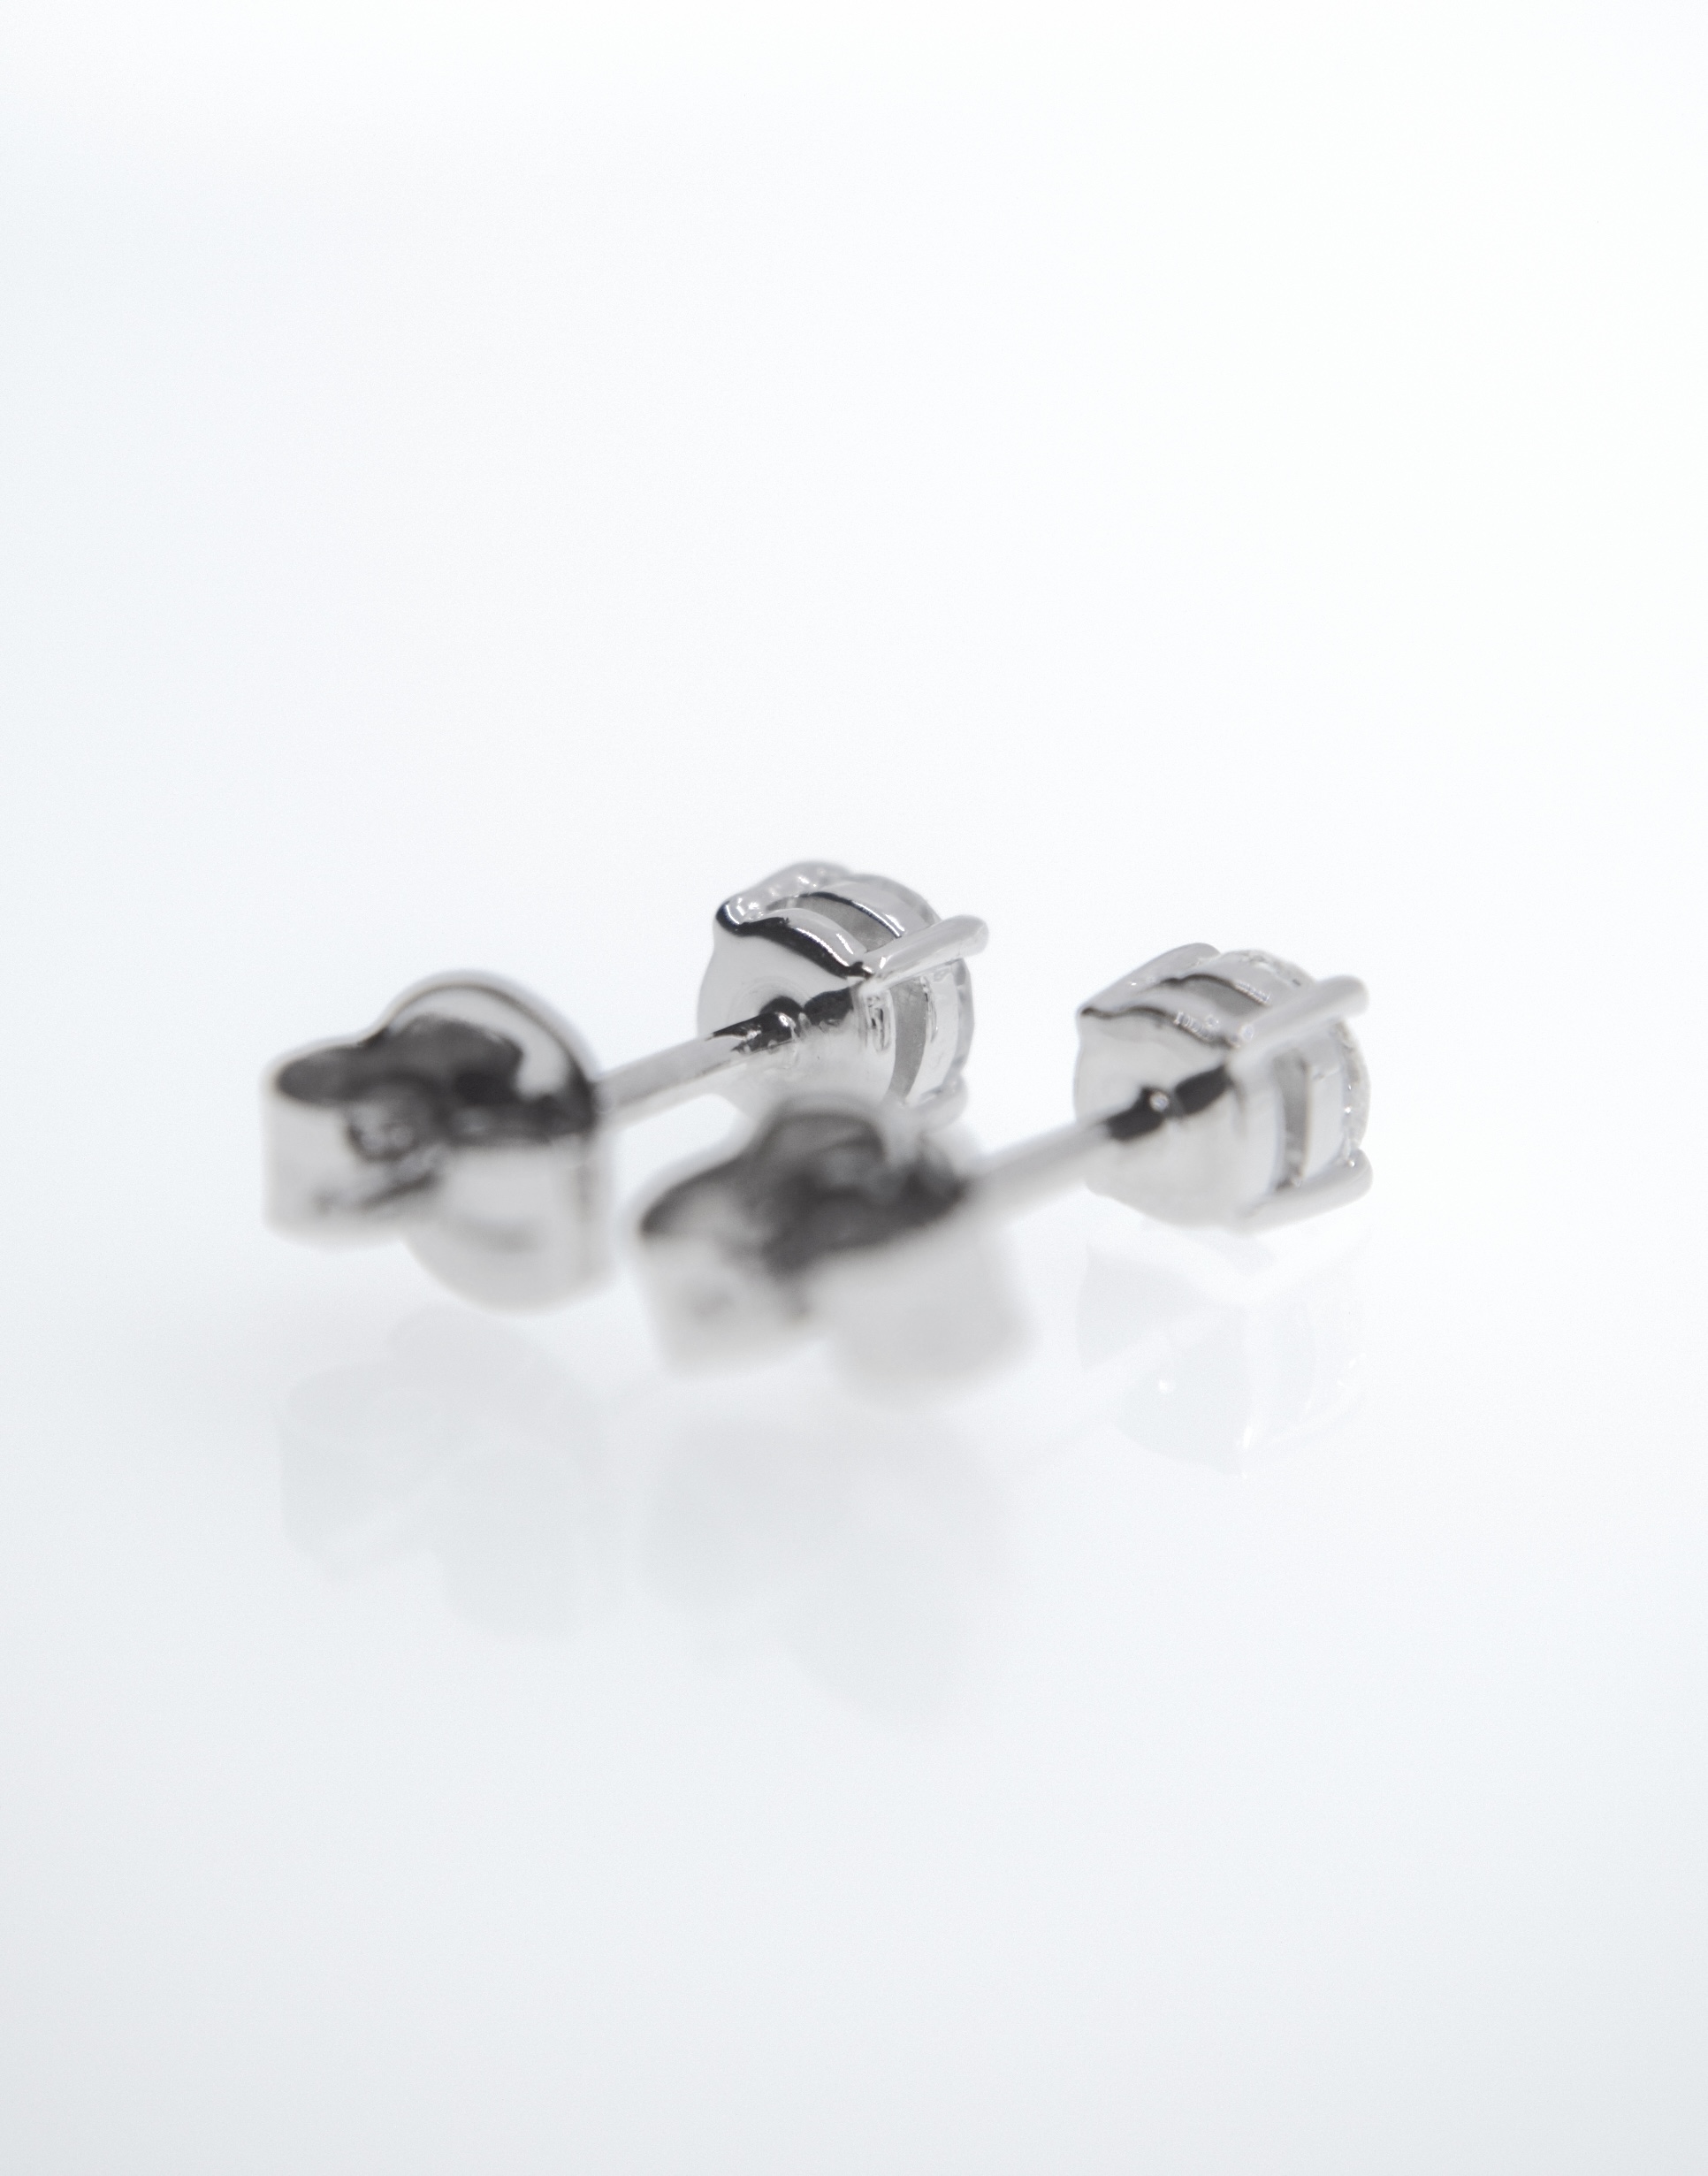 *STUNNING* 0.50CT DIAMOND SOLITAIRE EAR STUDS WITH HALLMARKED BACKS IN SOLID WHITE GOLD - Image 4 of 5